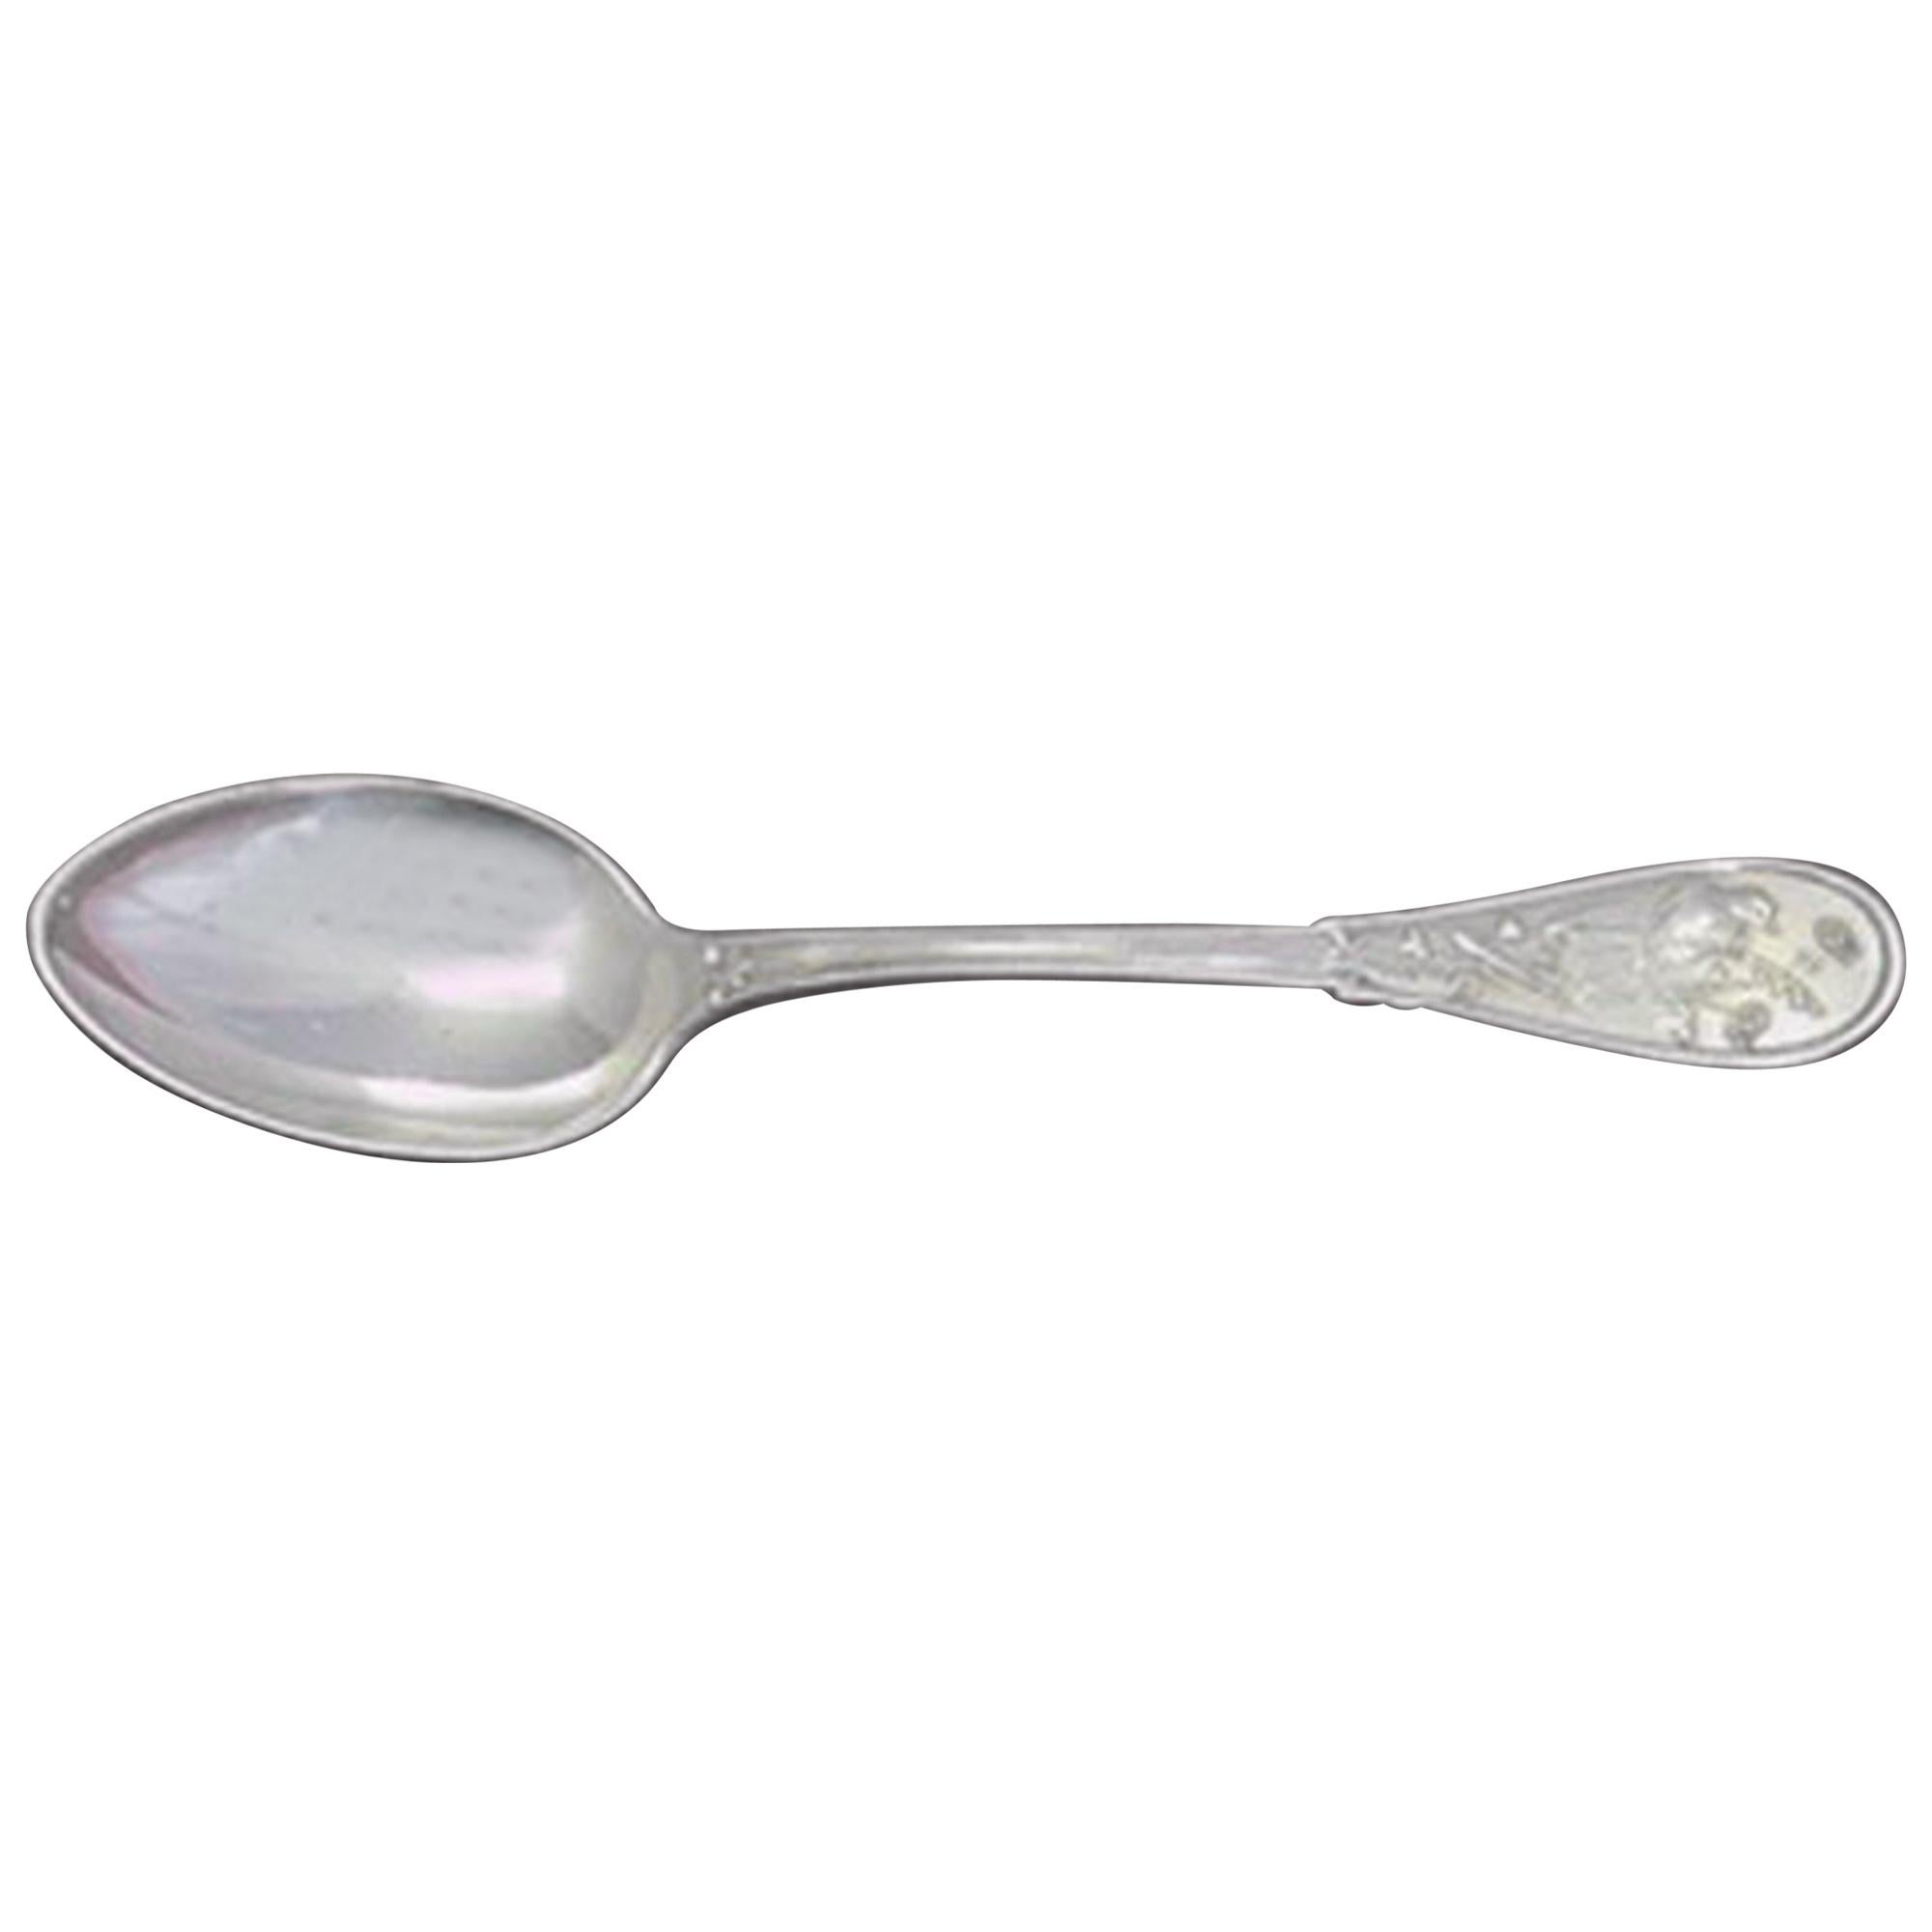 Japanese by Tiffany & Co. Sterling Silver Coffee Spoon